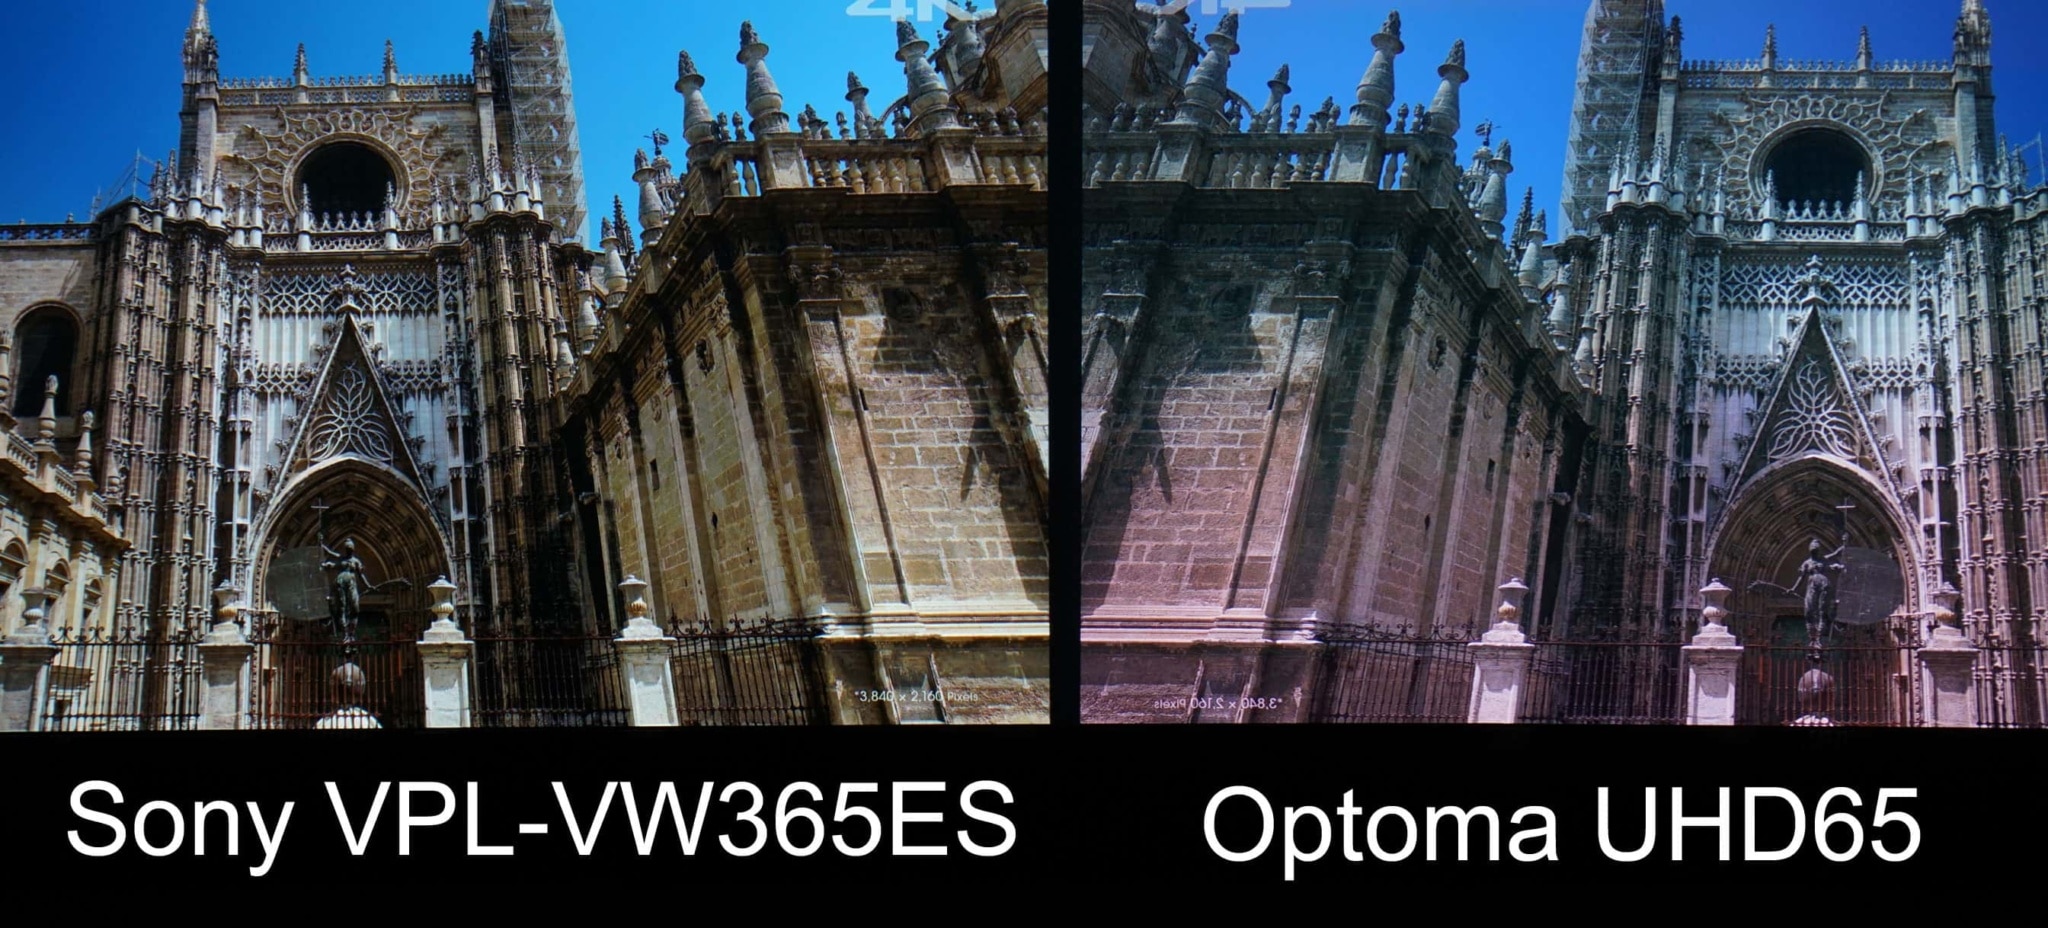 Side-by-side comparison of detail. Note: The camera shutter captured part of the color wheel cycle on the UHD65, which was not visible to the eye. Please disregard color difference in this image – it is used to evaluate detail only.